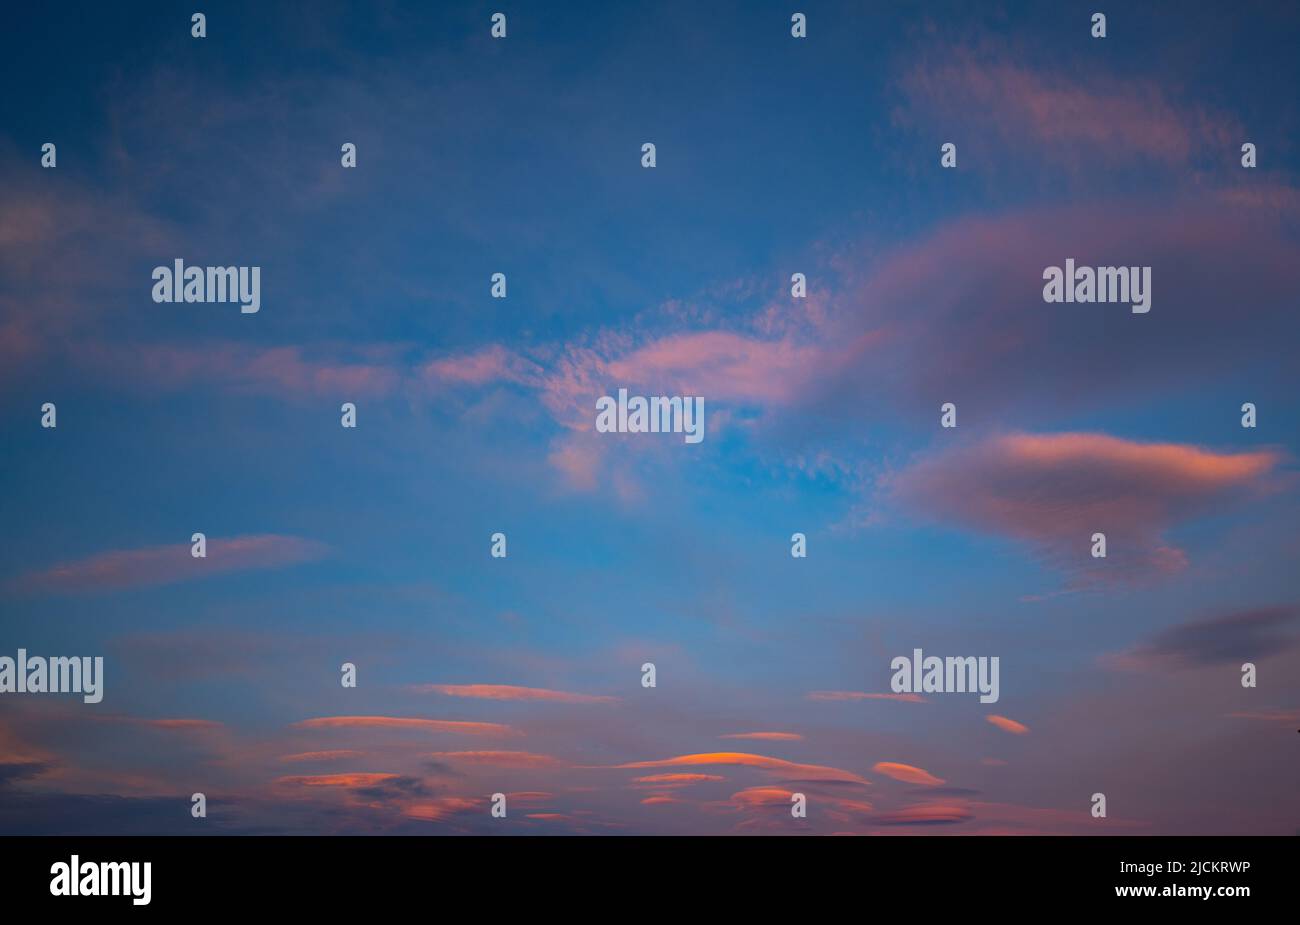 Beautiful sunset or sunrise sky with interesting cloud formation on island of Faial in the Azores in Portugal empty space for type horizontal format Stock Photo